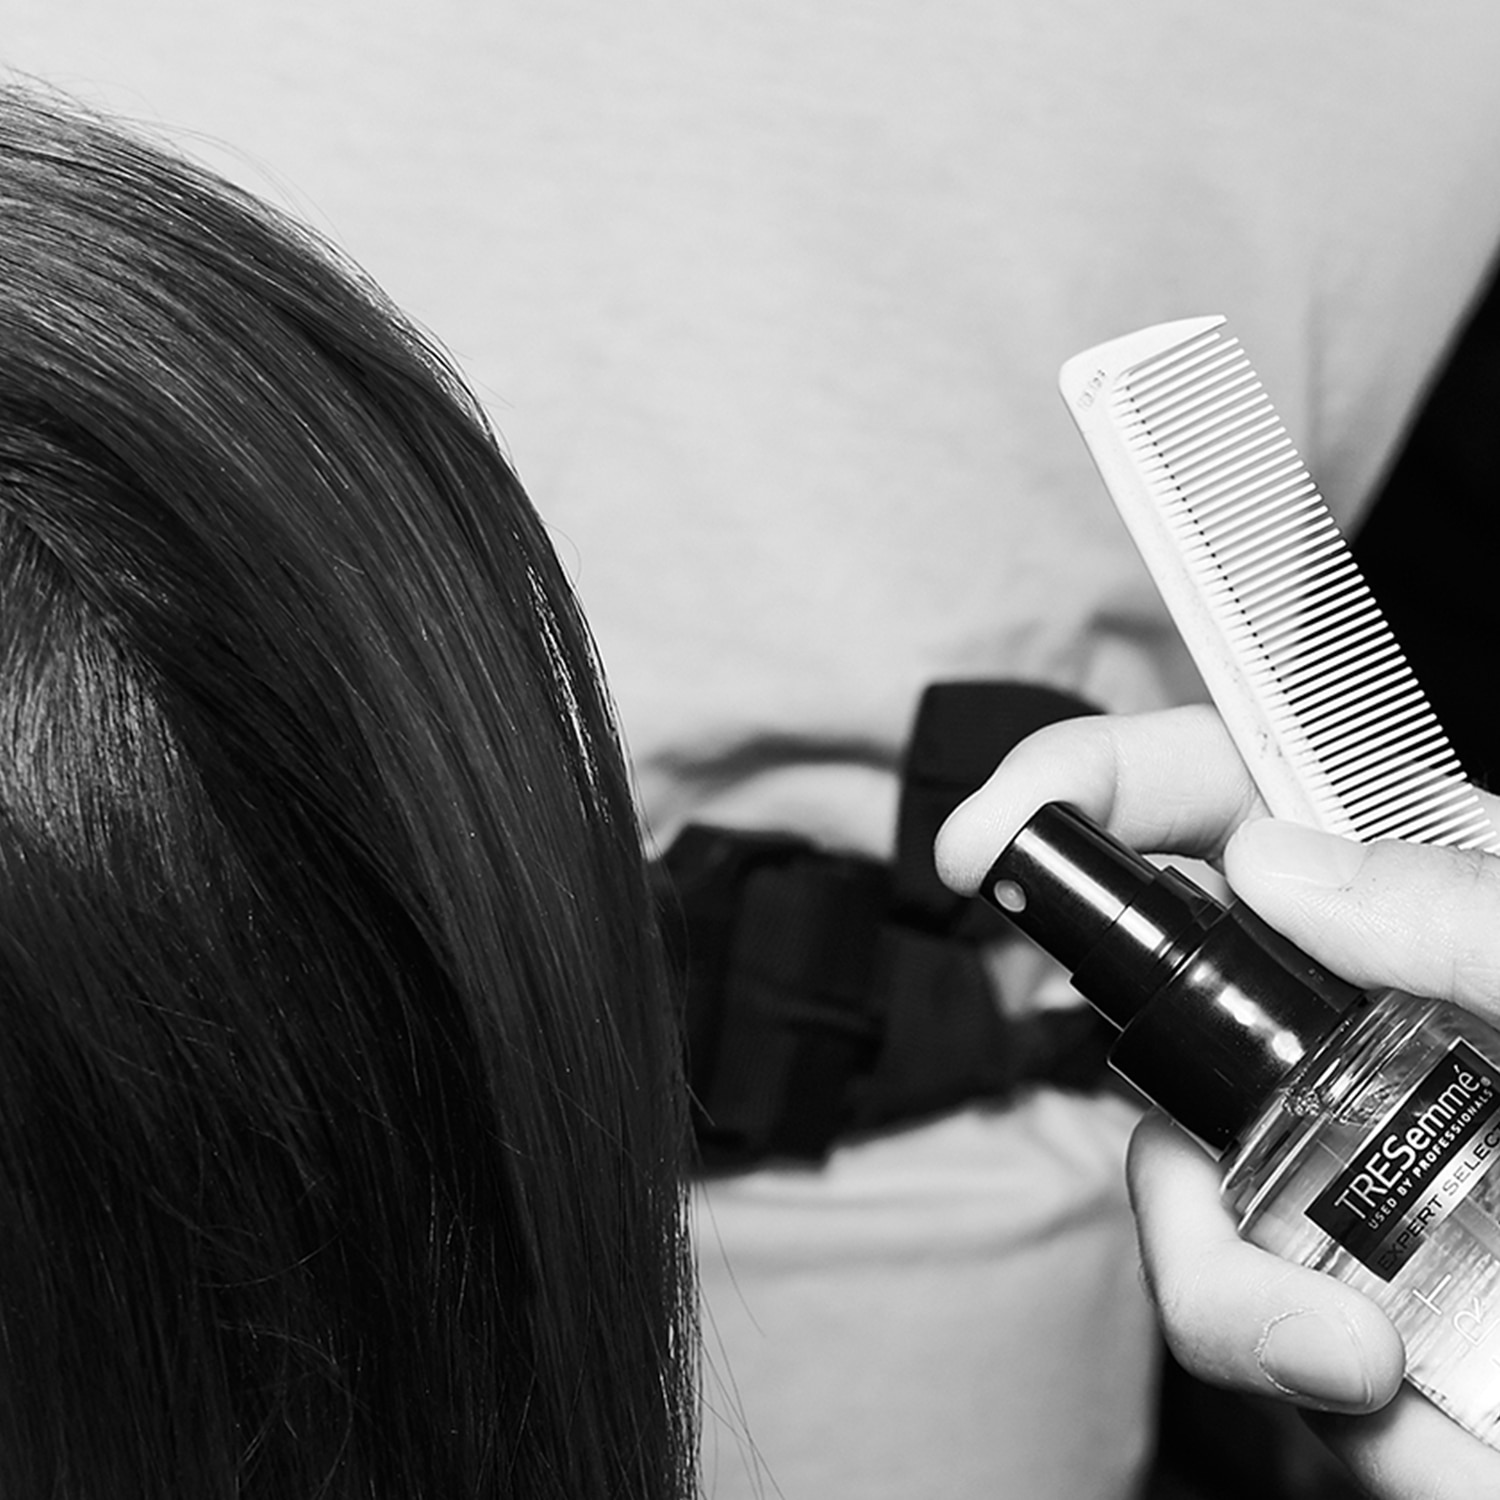 Black and white close up shot of the side of a woman's head with a parting in her hair, plus the hands of a stylist holding a comb and TRESemmé hair care product